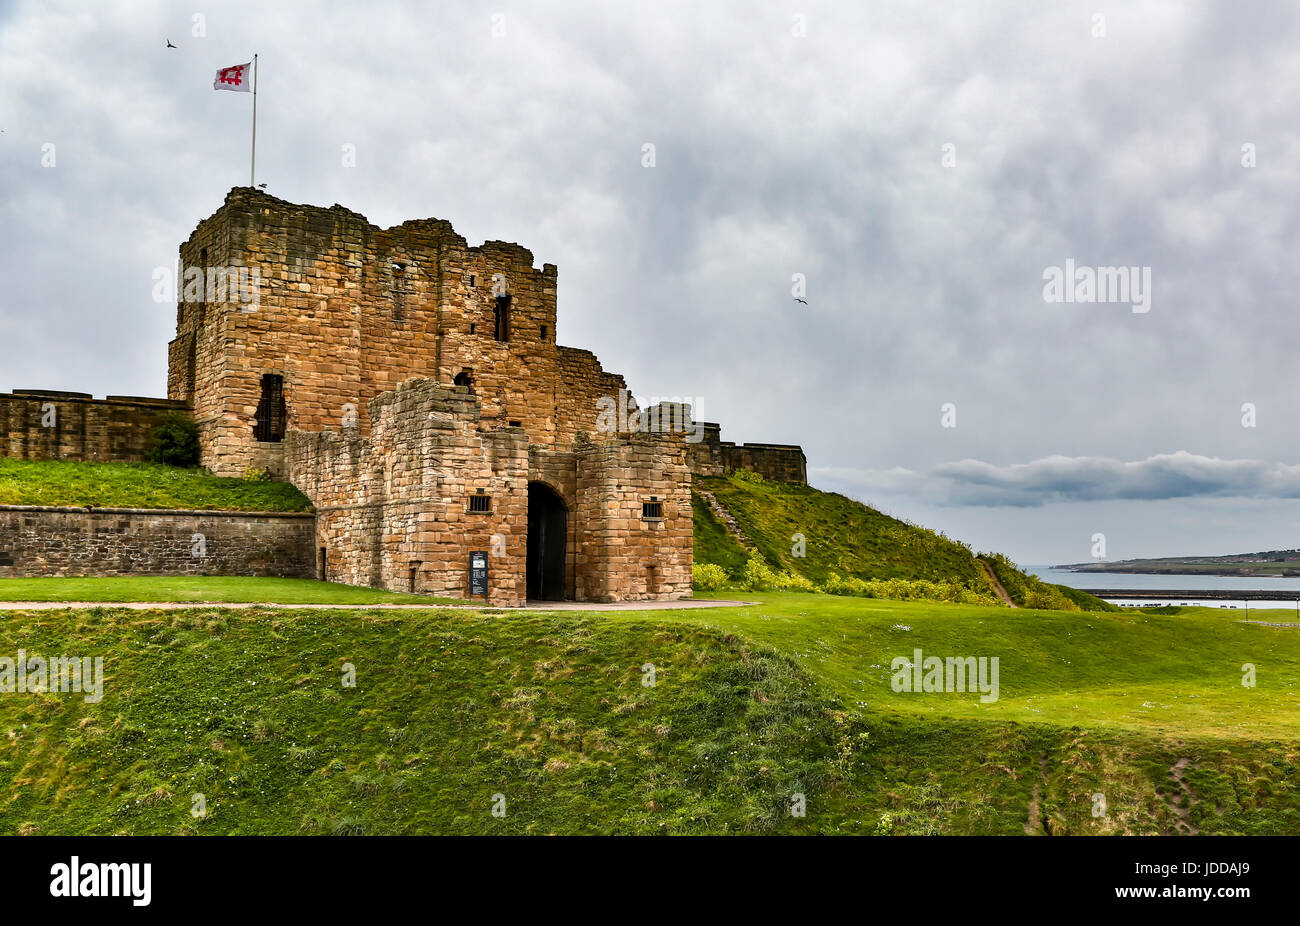 Tynemouth Priory and Castle, Tynemouth, Tyne and Wear, England, United Kingdom Stock Photo